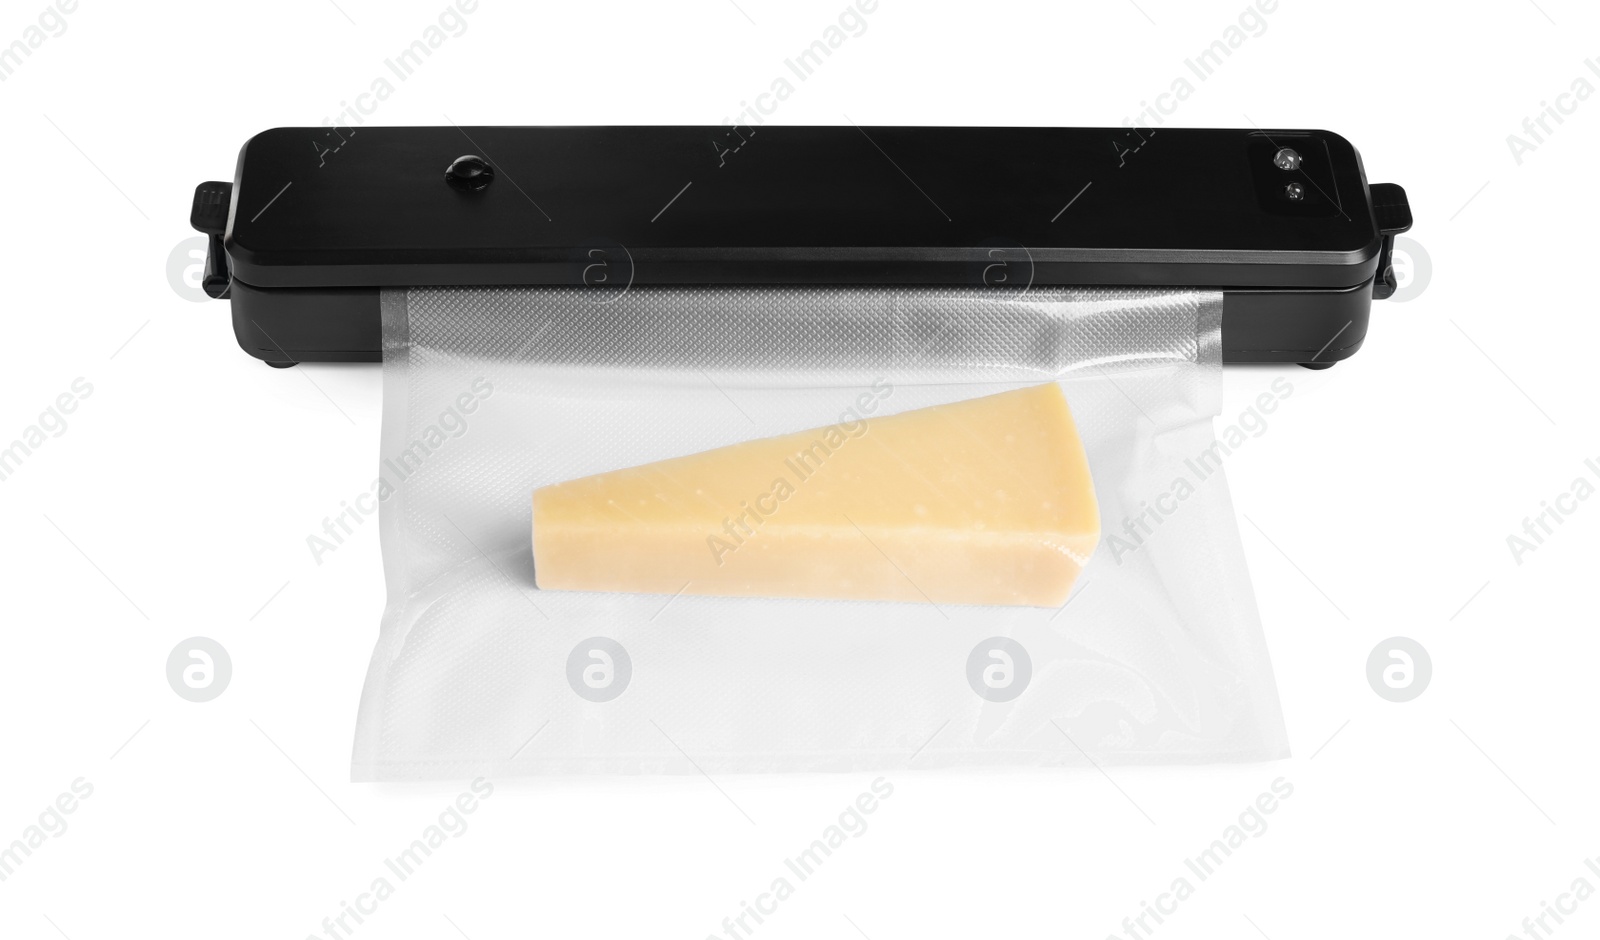 Photo of Vacuum packing sealer and plastic bag with cheese on white background